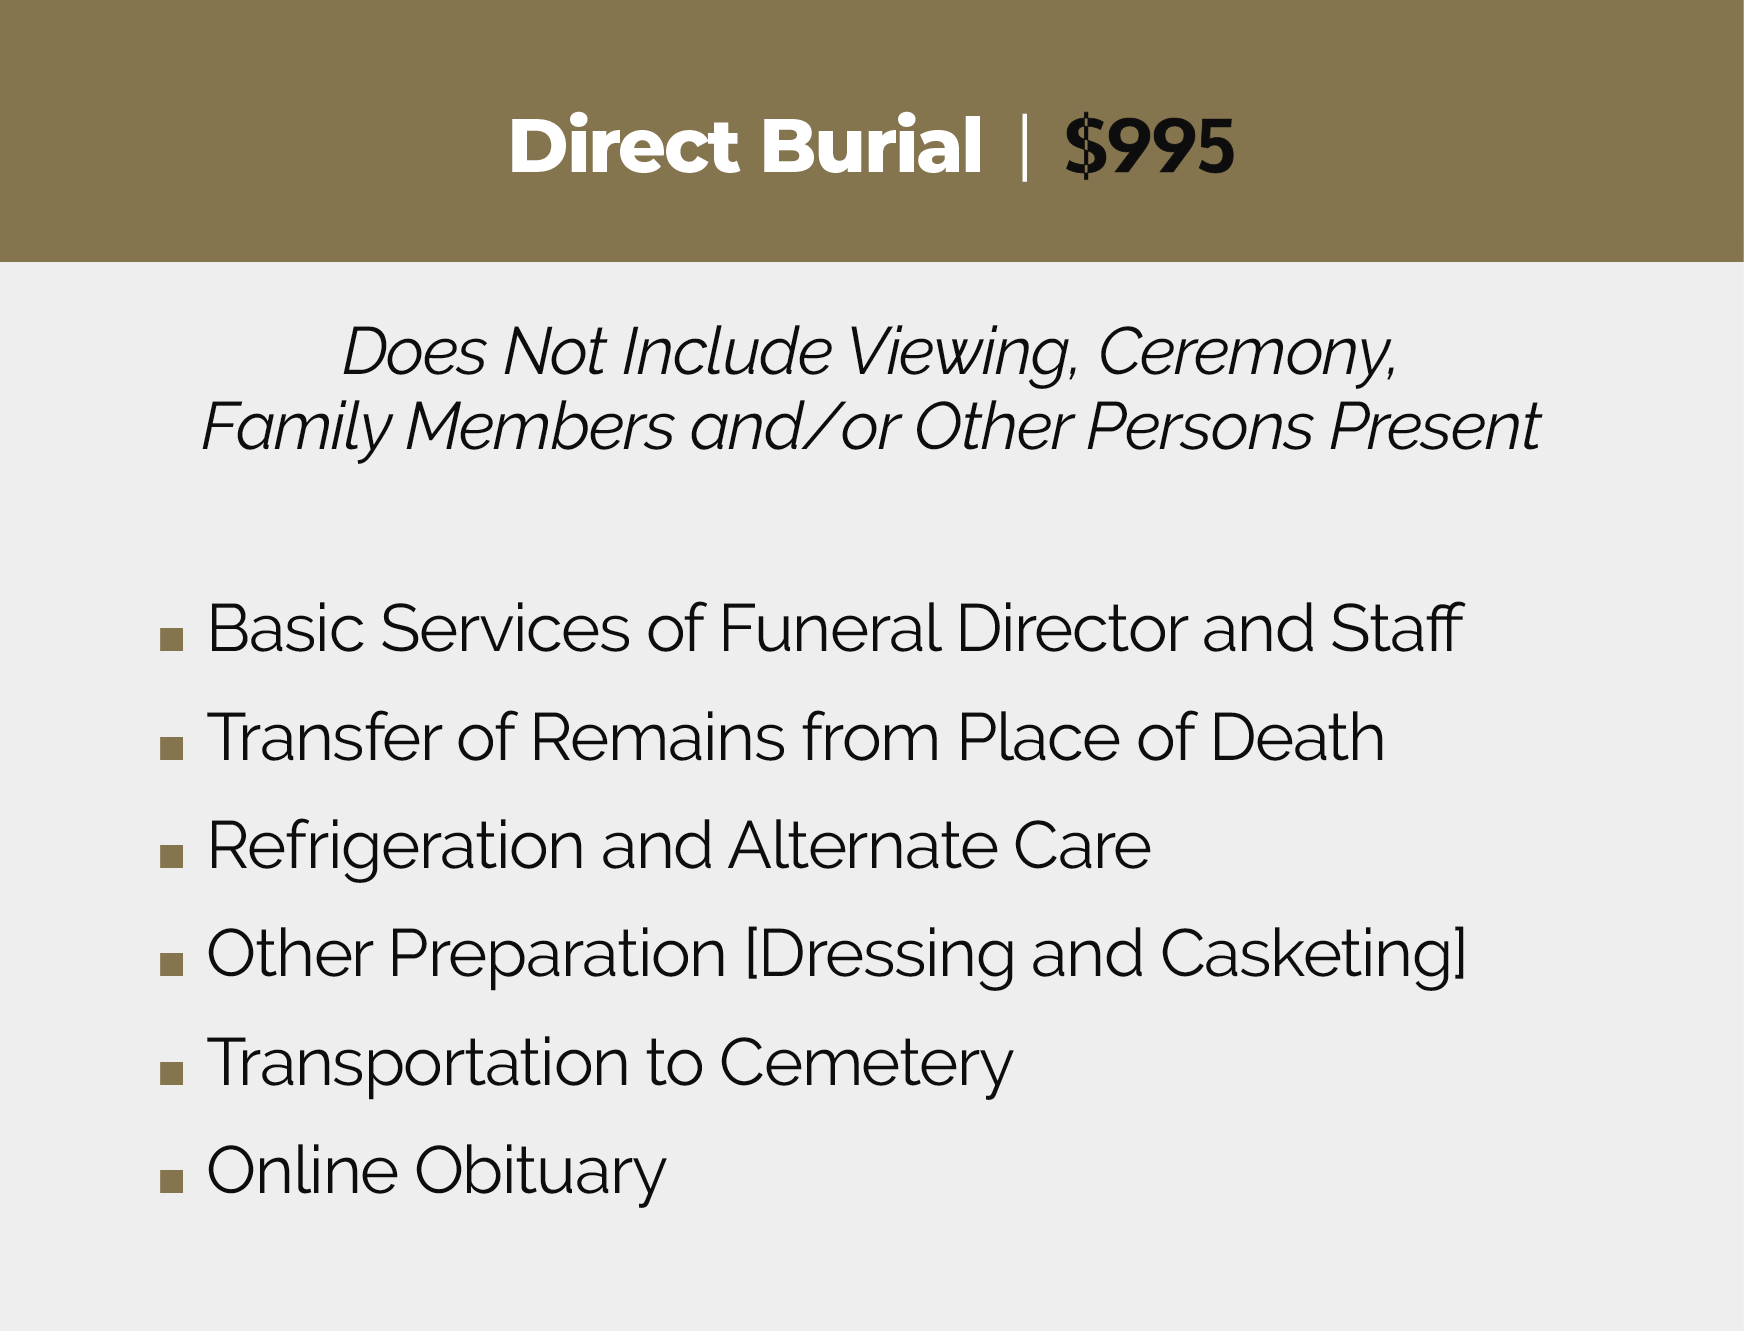 Direct Burial Packages | Boyd-Panciera Family Funeral Care